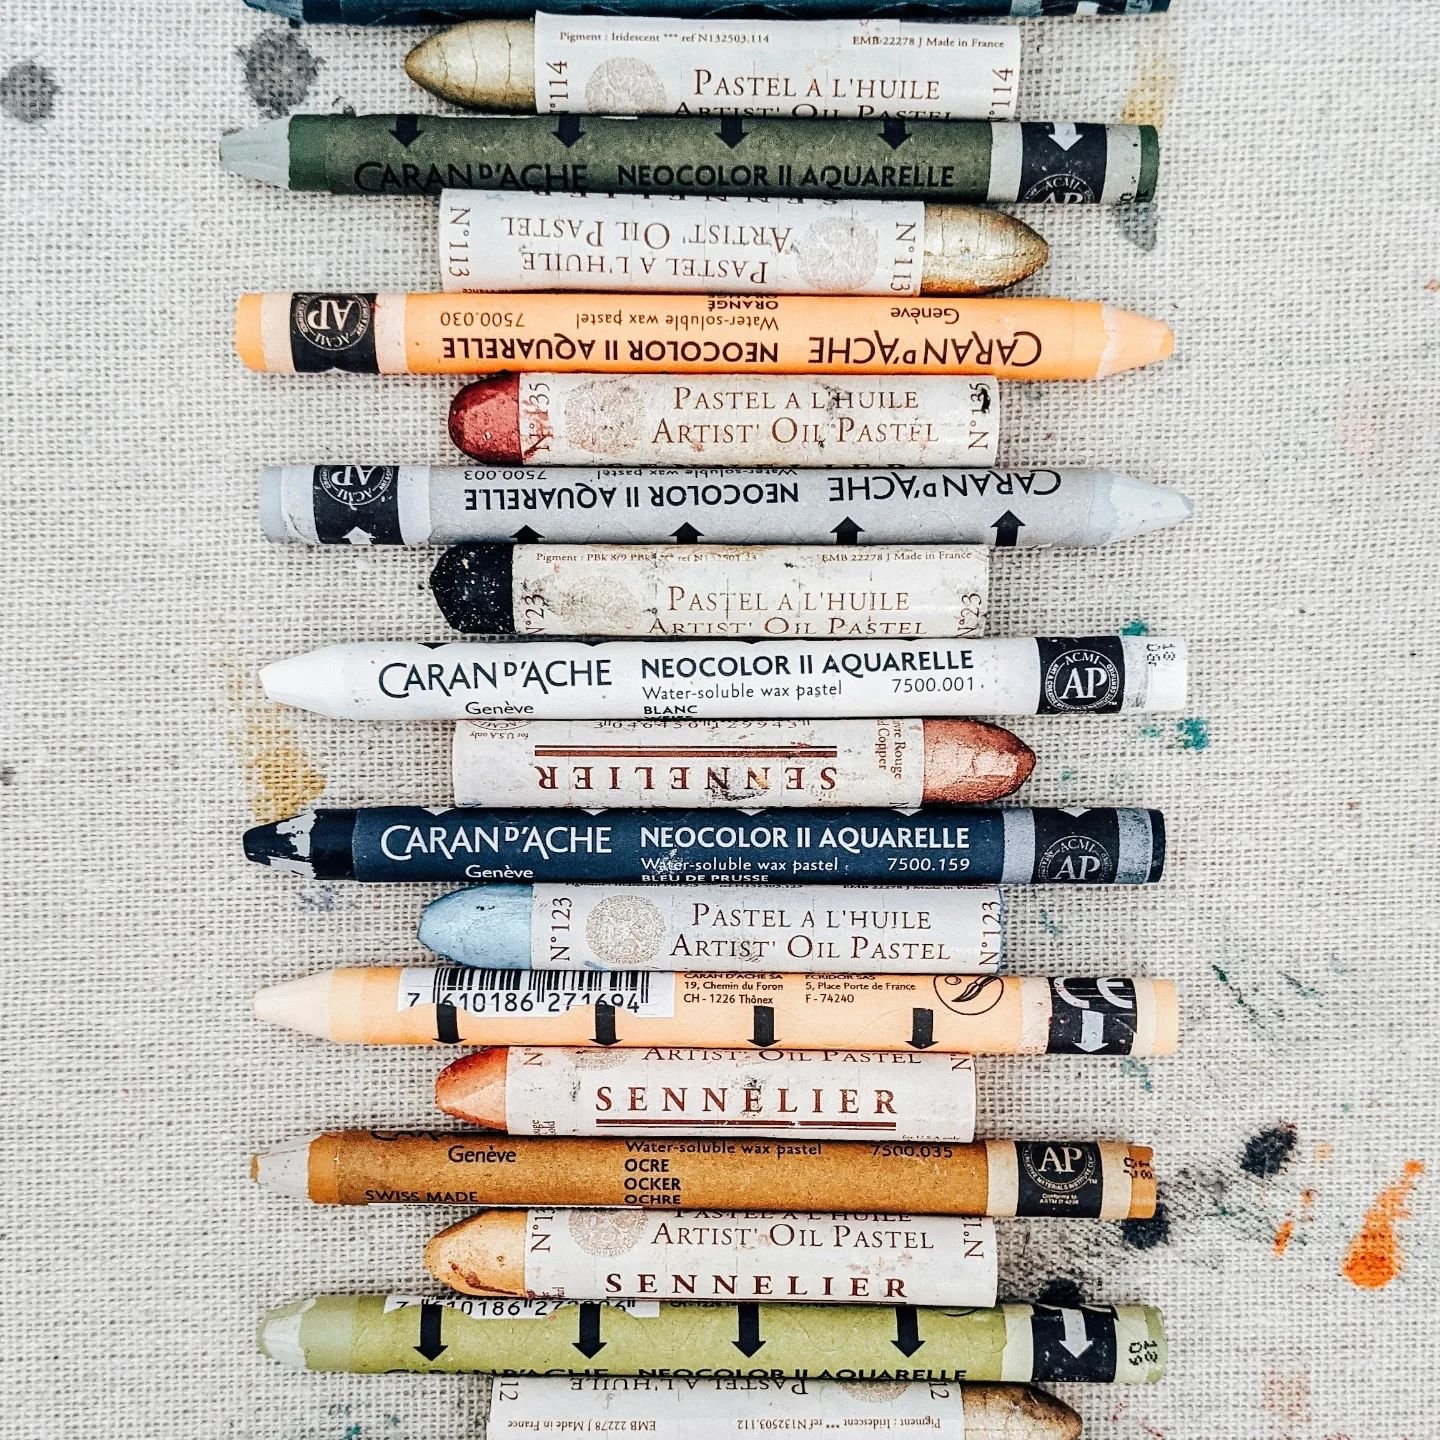 What are some of your favorite ways to get inspired?

Sometimes just getting out some art supplies and just holding them (or arranging them!) makes me think of something that I'd like to try. Other times I need to get outside and be out in nature. An